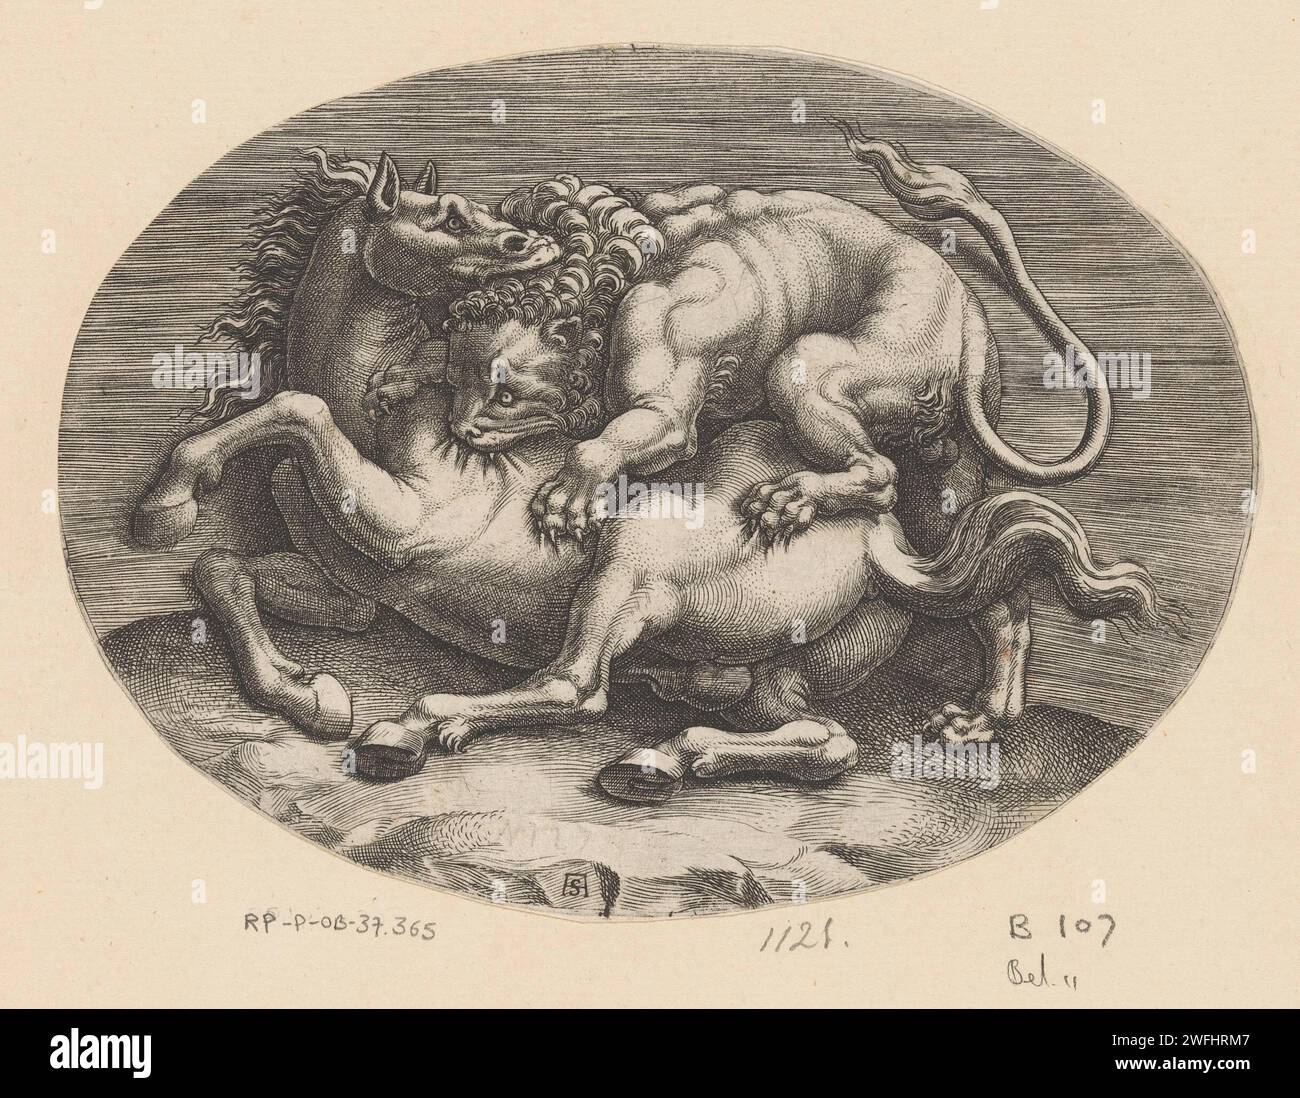 Horse attacked by a lion, Adamo Scultori, After Giulio Romano, After Anonymous, c. 1540 - c. 1585 print A lion and a horse in fight. The lion climbed the horse in an attack. He bitten himself in the skin of the horse, while the horse in turn biting the Lion's head. print maker: Italyafter drawing by: Italyafter sculpture by: Rome paper engraving beasts of prey, predatory animals: lion. horse. animals (+ fighting animals; aggressive relations) Stock Photo